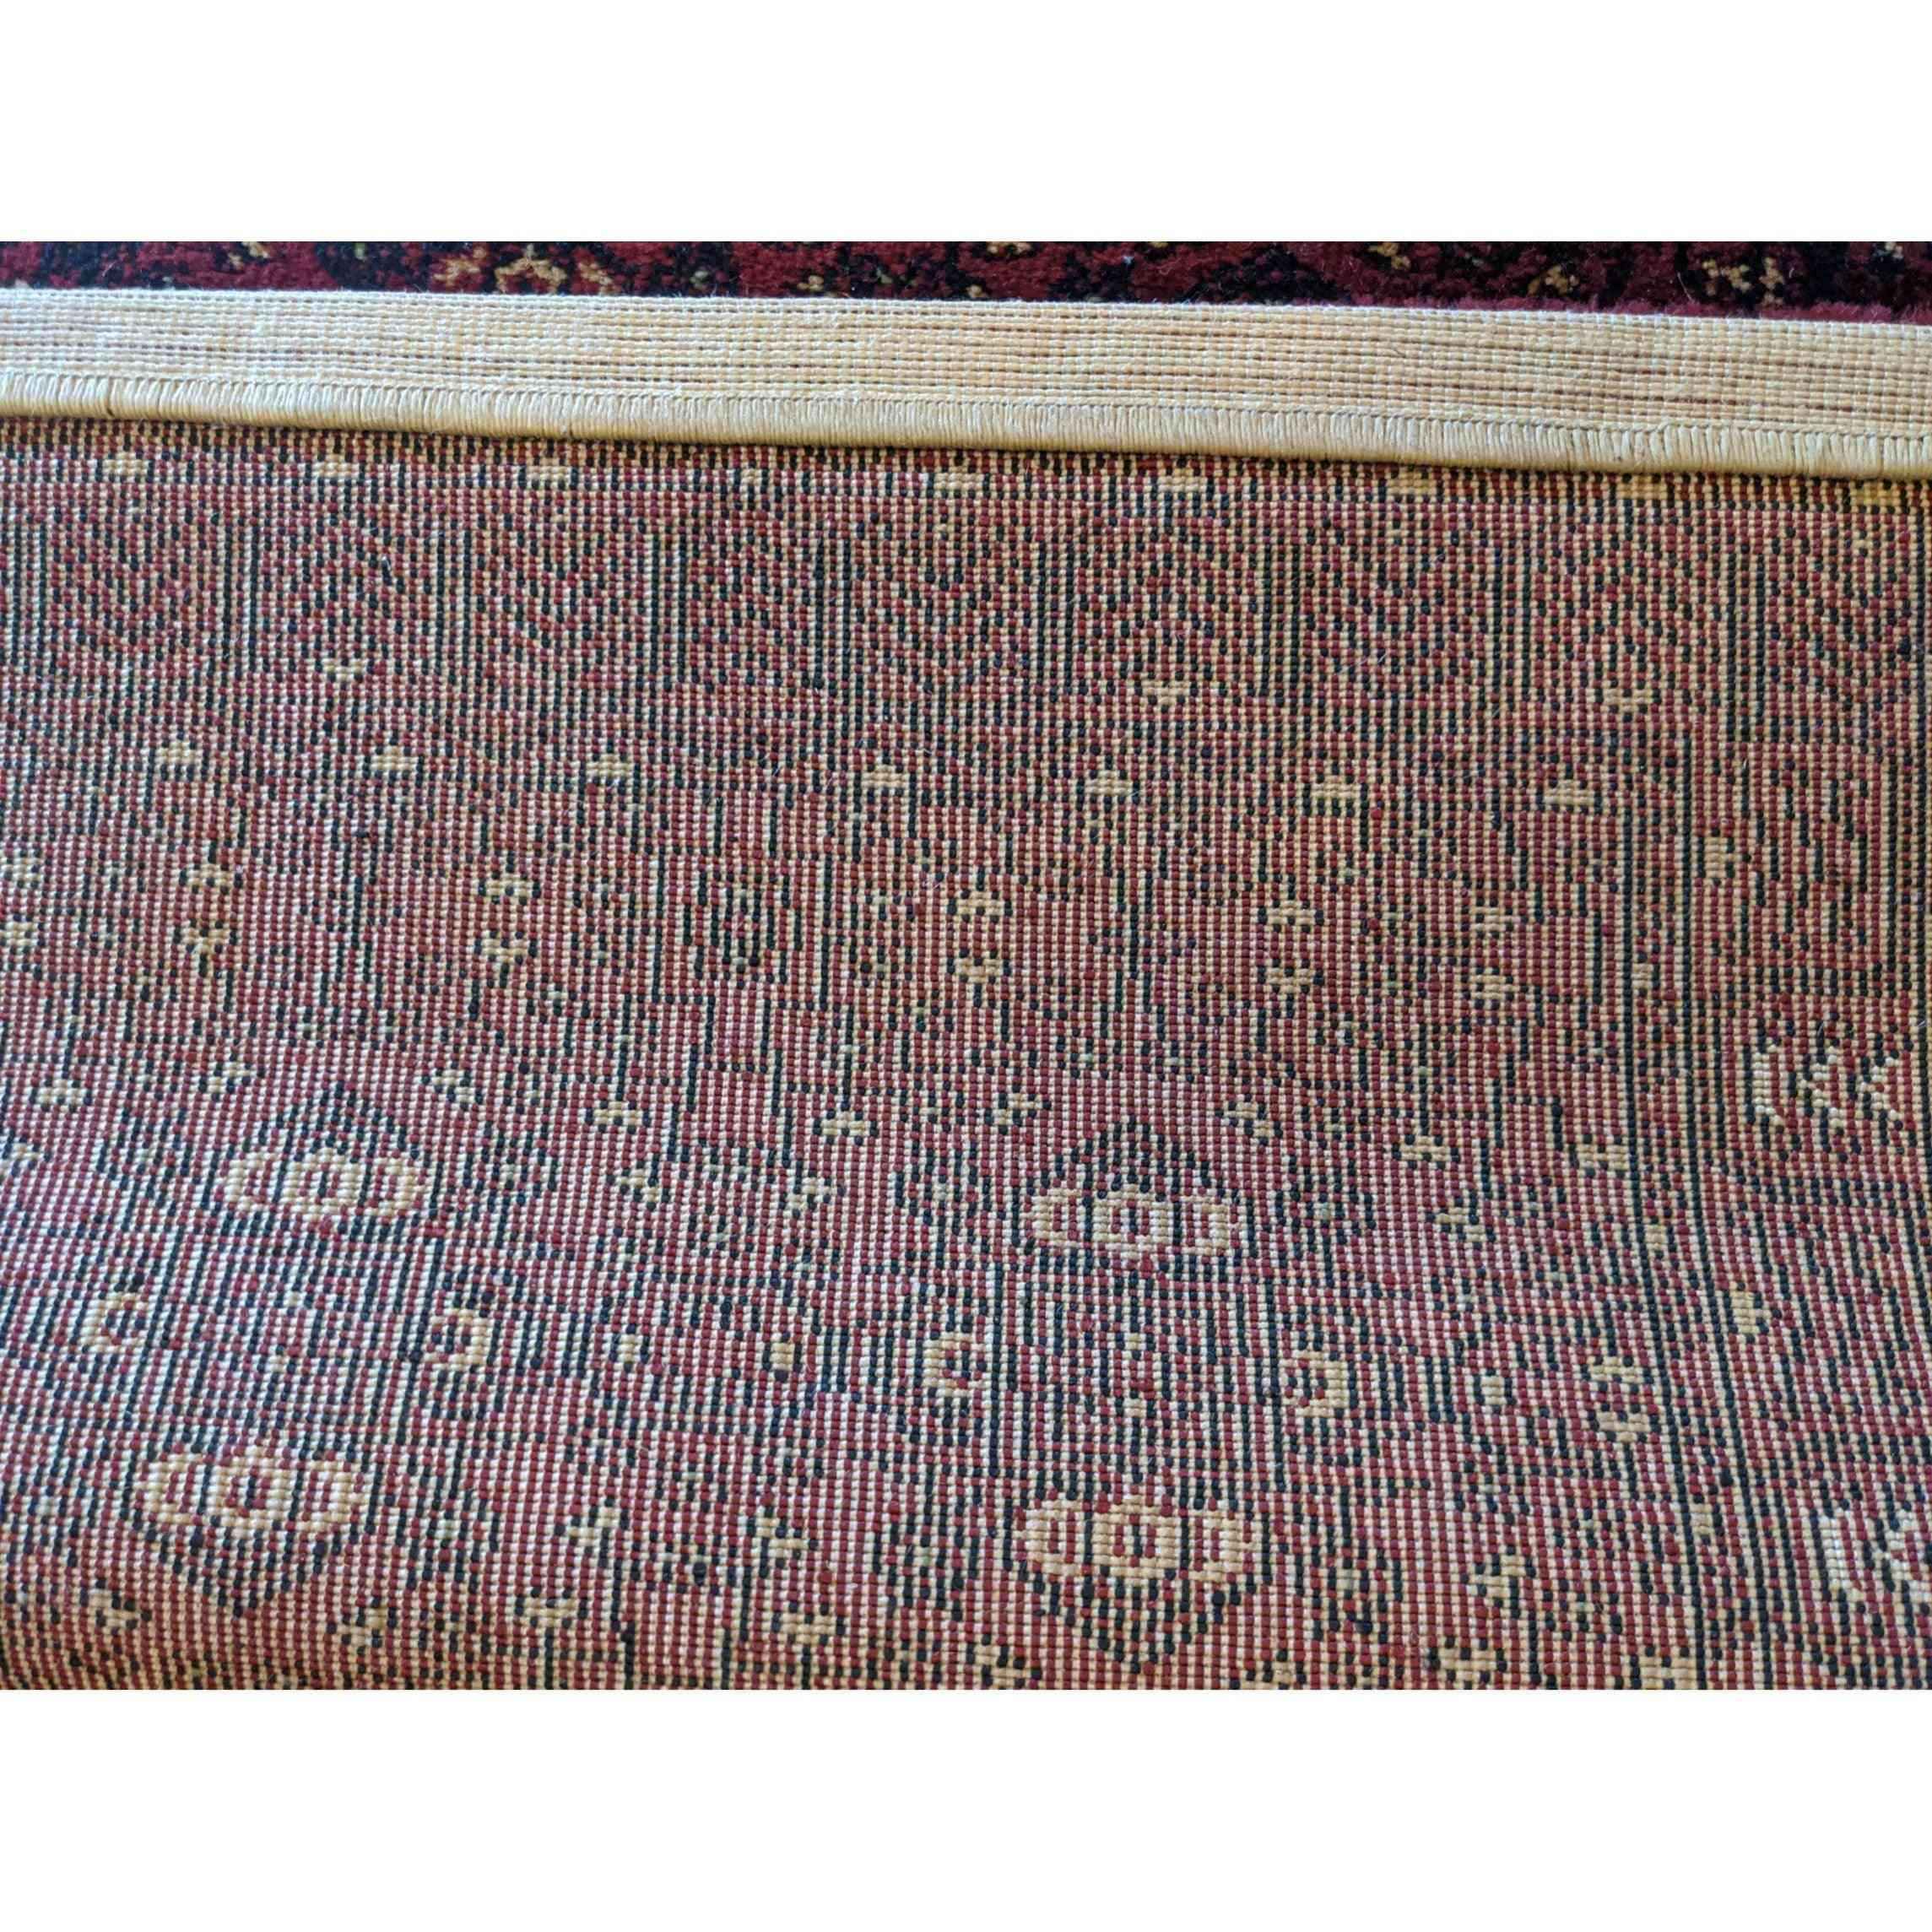 75 x 60 cm Afghan Tribal Red Small Rug - Rugmaster